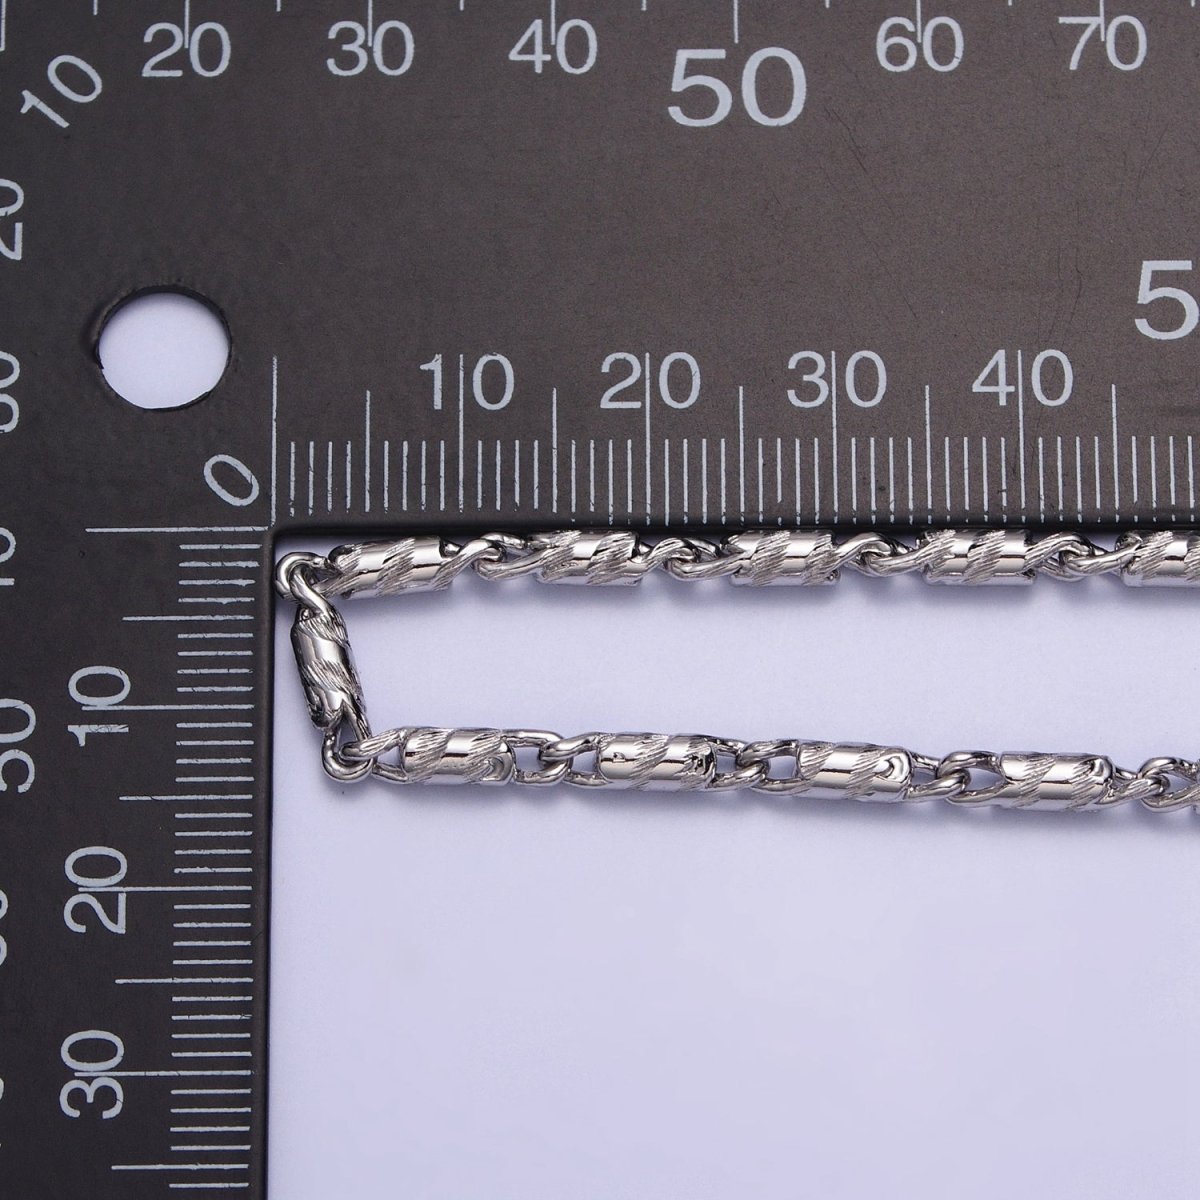 21.75 Inch Tube Chain Silver Dainty Tube Cable Link Necklace Ready to Wear for Jewelry Making w/ Clasp for Jewelry Making Supply | WA-1607 Clearance Pricing - DLUXCA